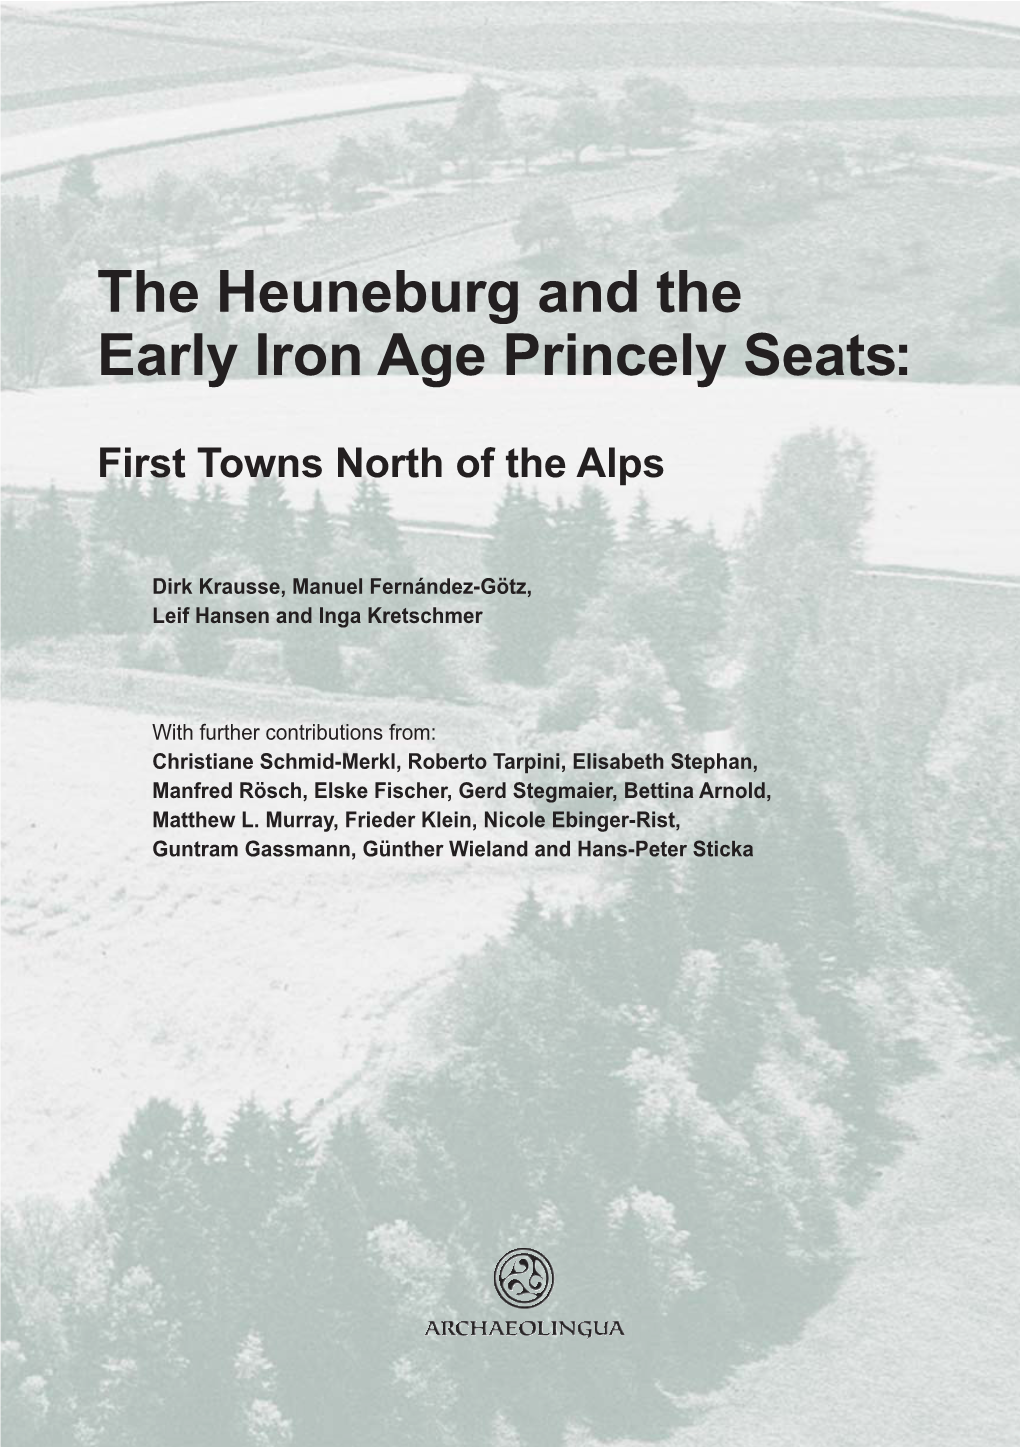 The Heuneburg and the Early Iron Age Princely Seats